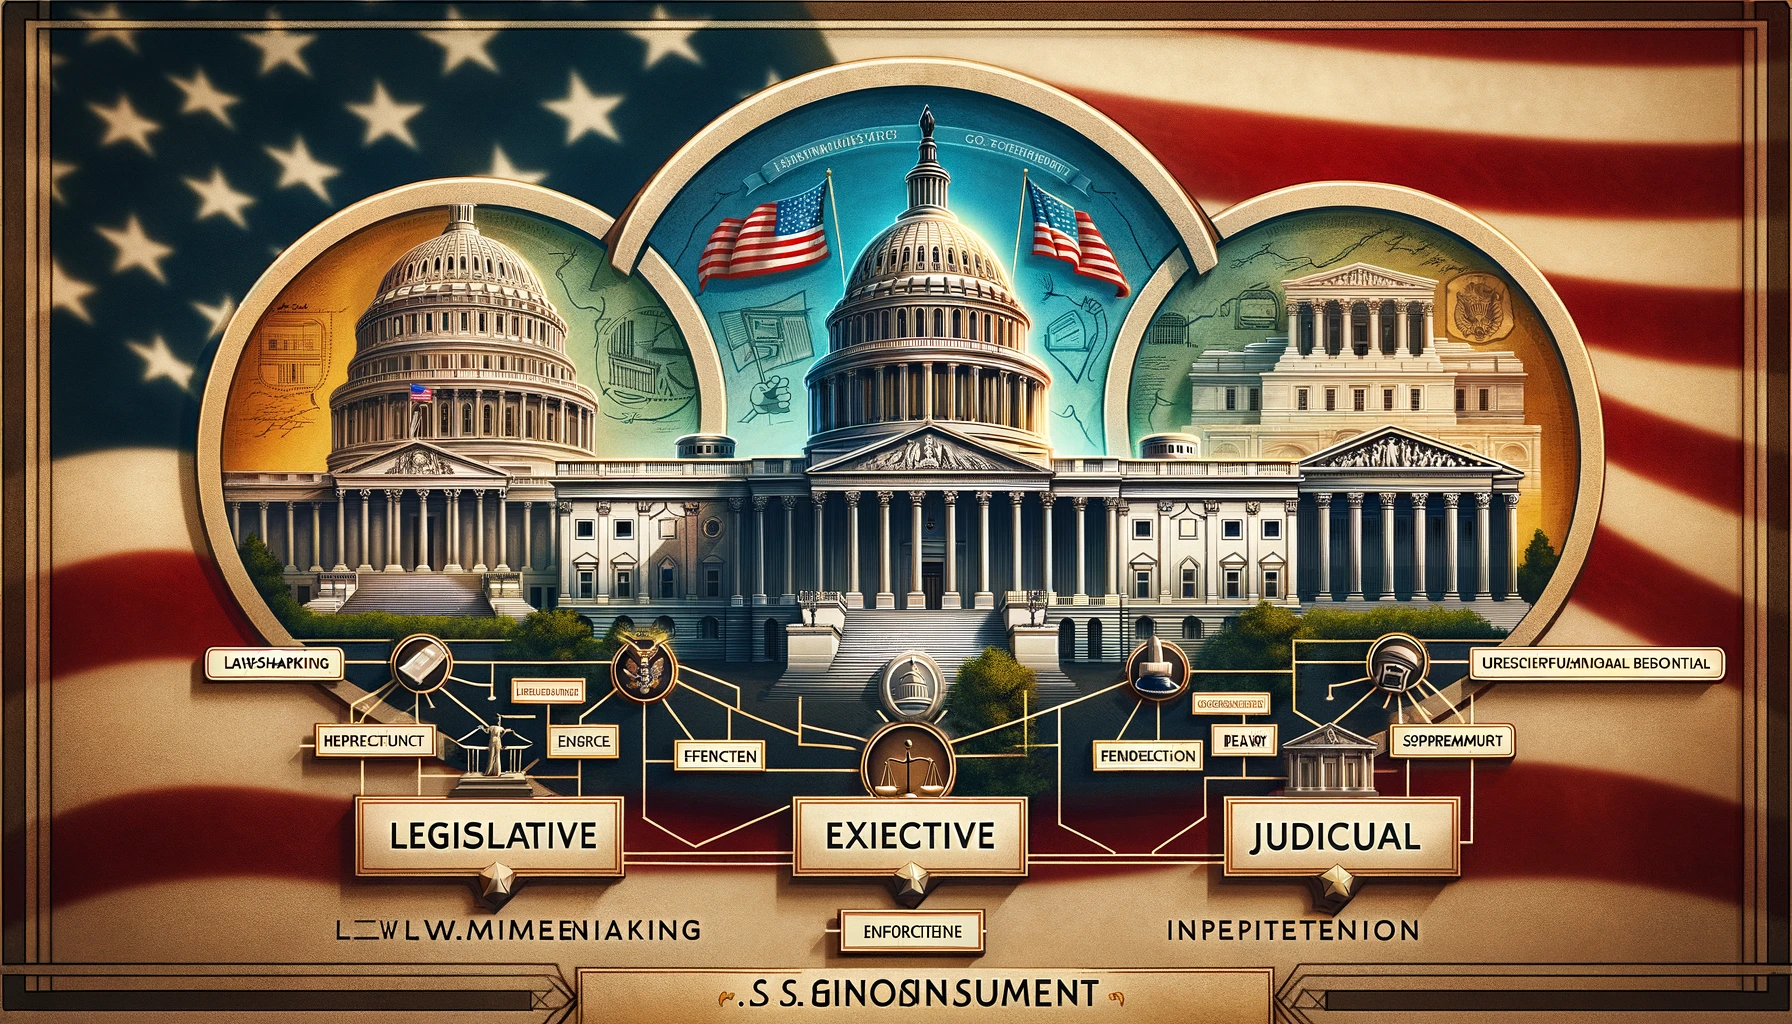 Illustration of the U.S. federal government structure with the Capitol, White House, and Supreme Court buildings.